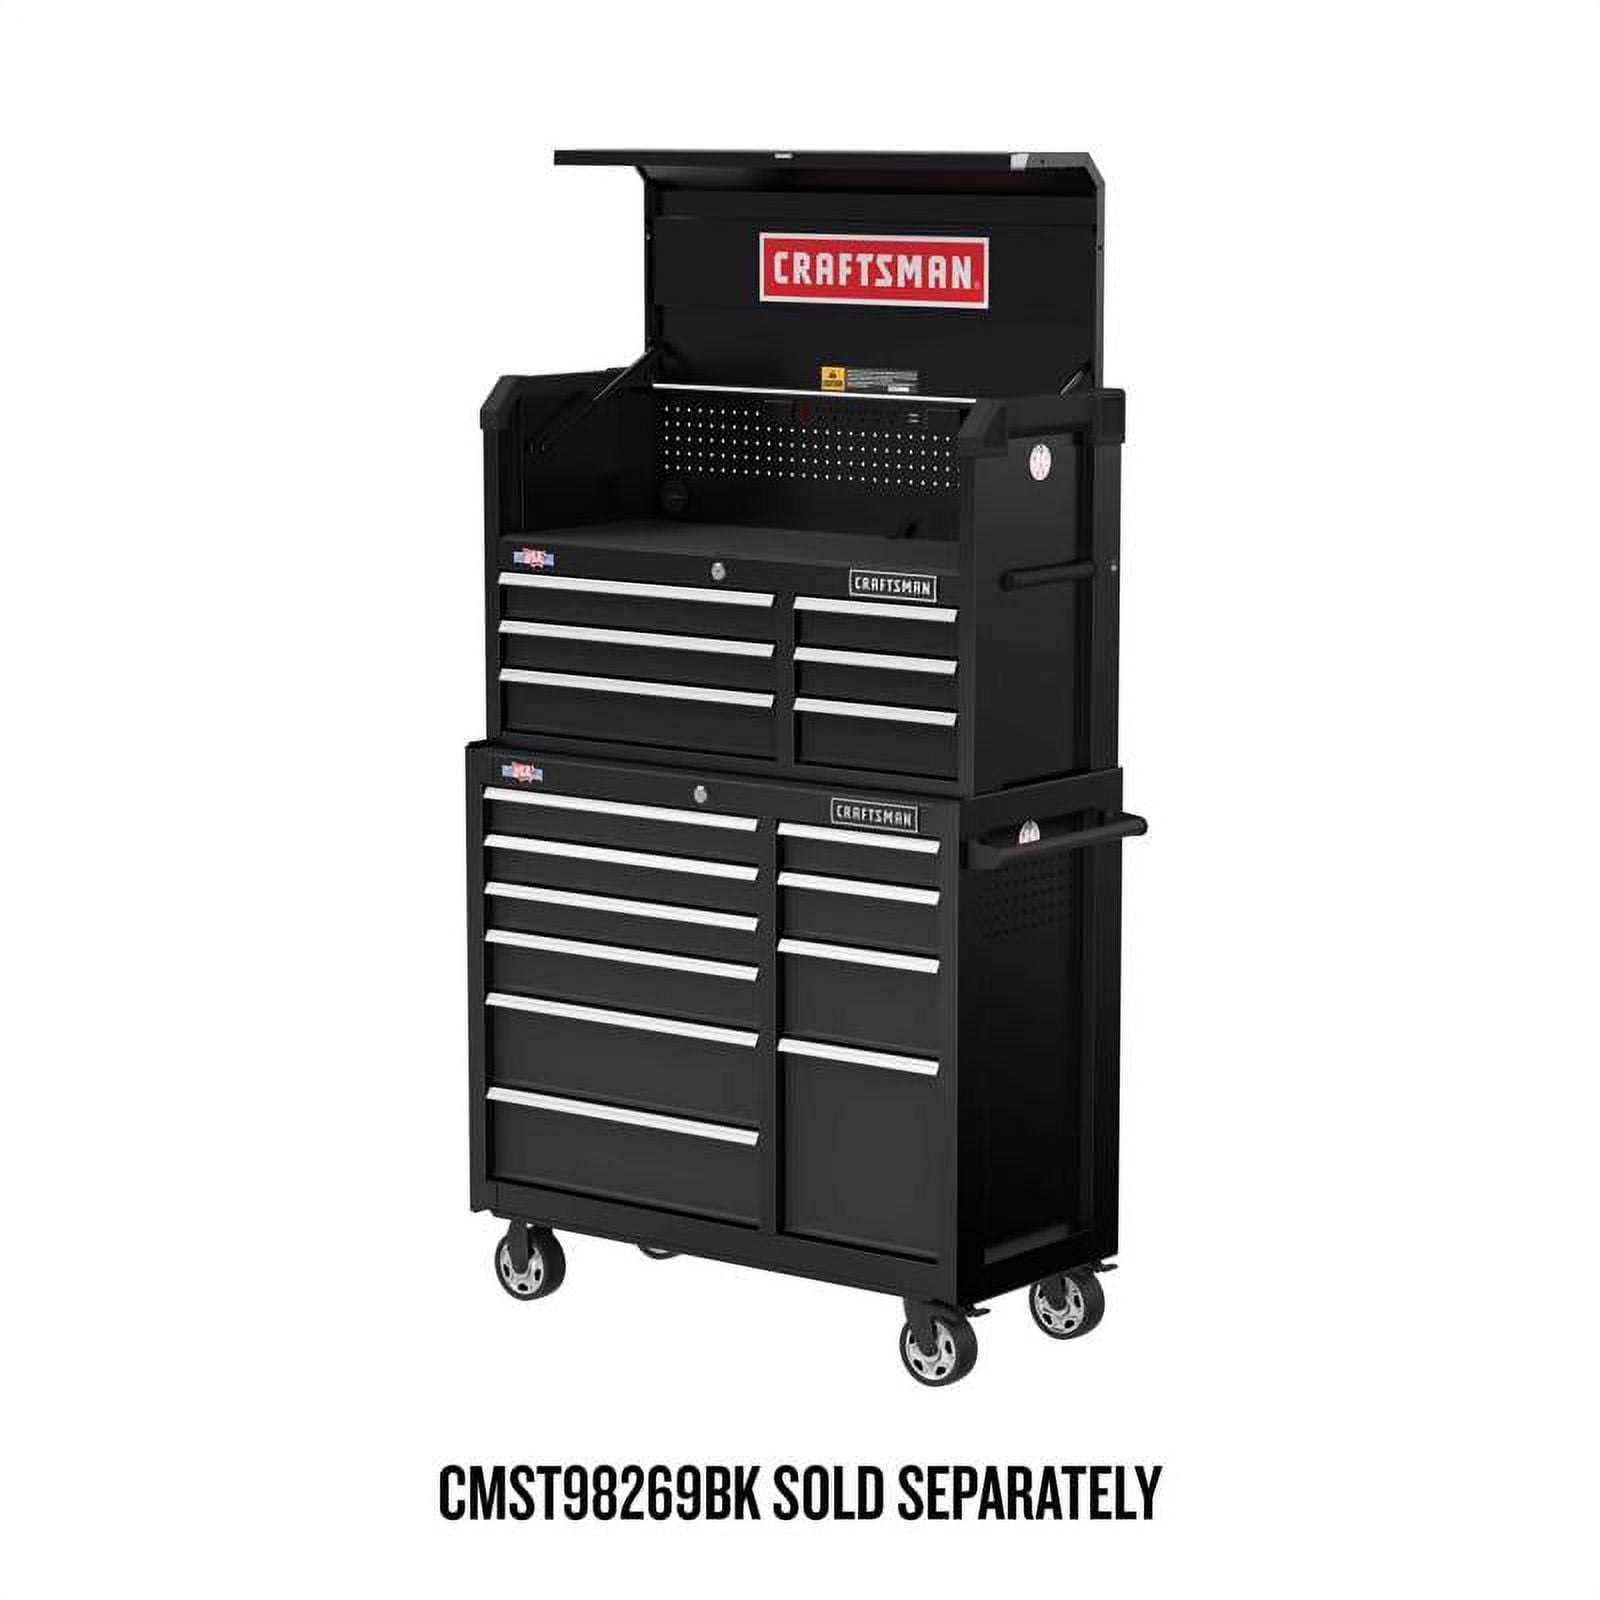 Craftsman S2000 41 in. 10 drawer Steel Rolling Tool Cabinet 37.5 in. H X 18  in. D